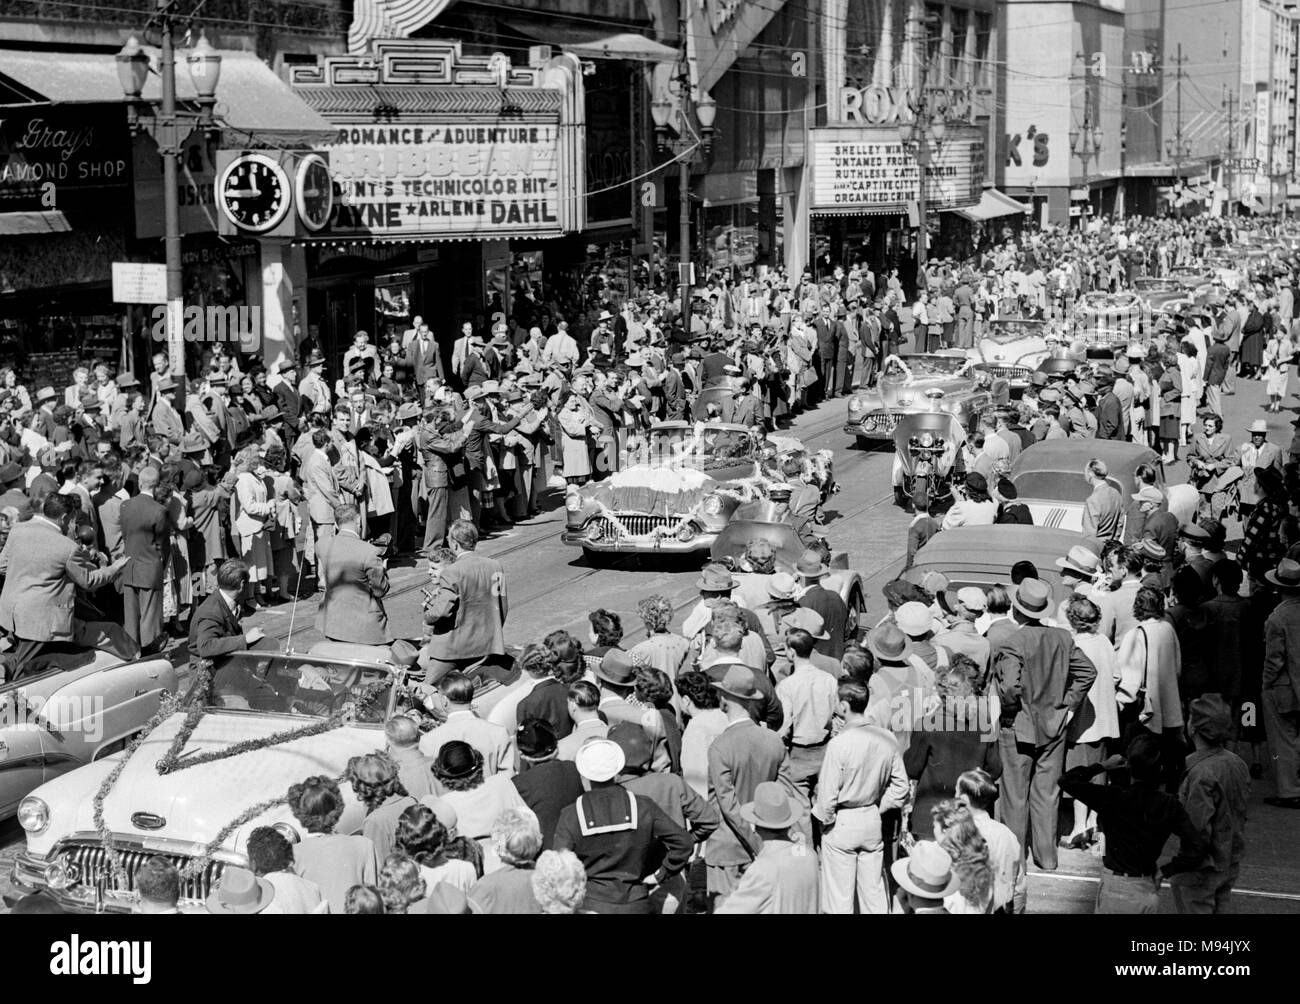 Democratic presidential candidate Adlai Stevenson, middle car, campaigns through downtown Kansas City, Missouri in 1952. Stock Photo